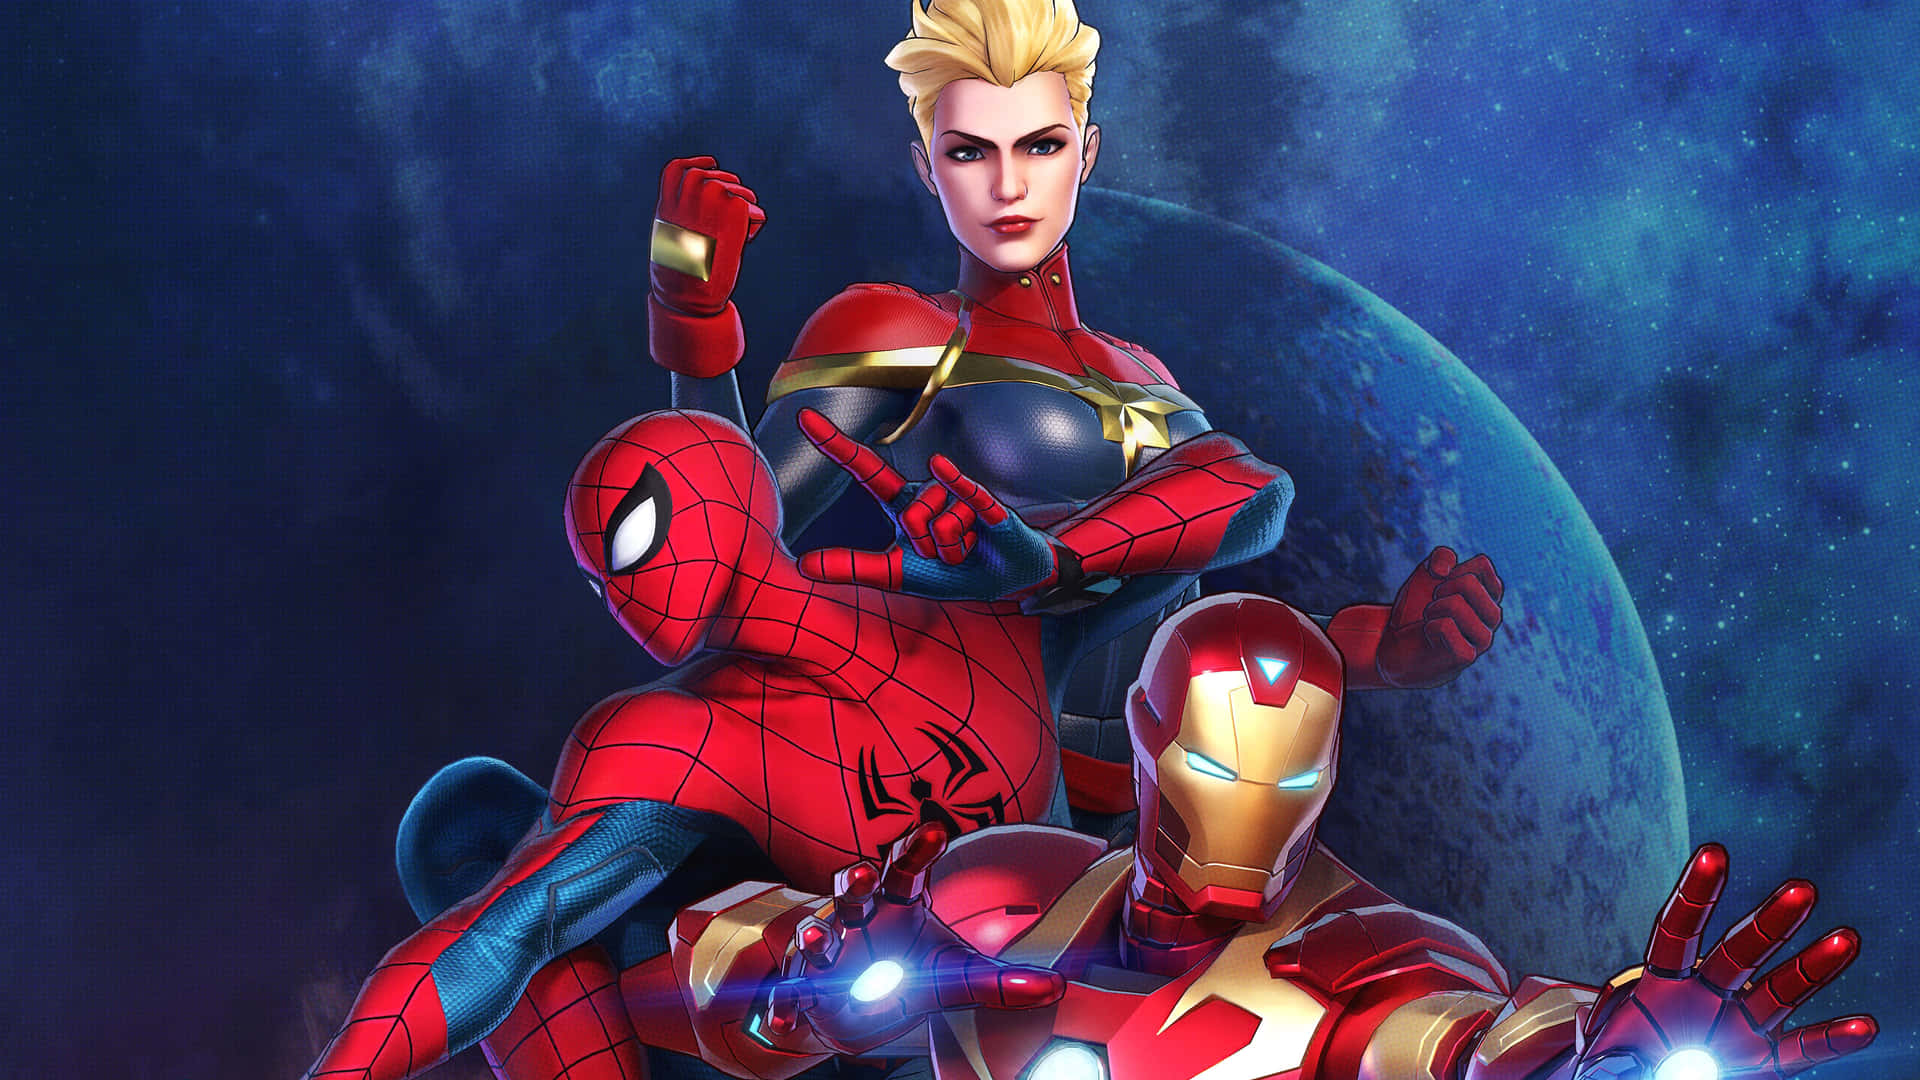 Spider Man And Iron Man Unite To Fight For Justice Wallpaper